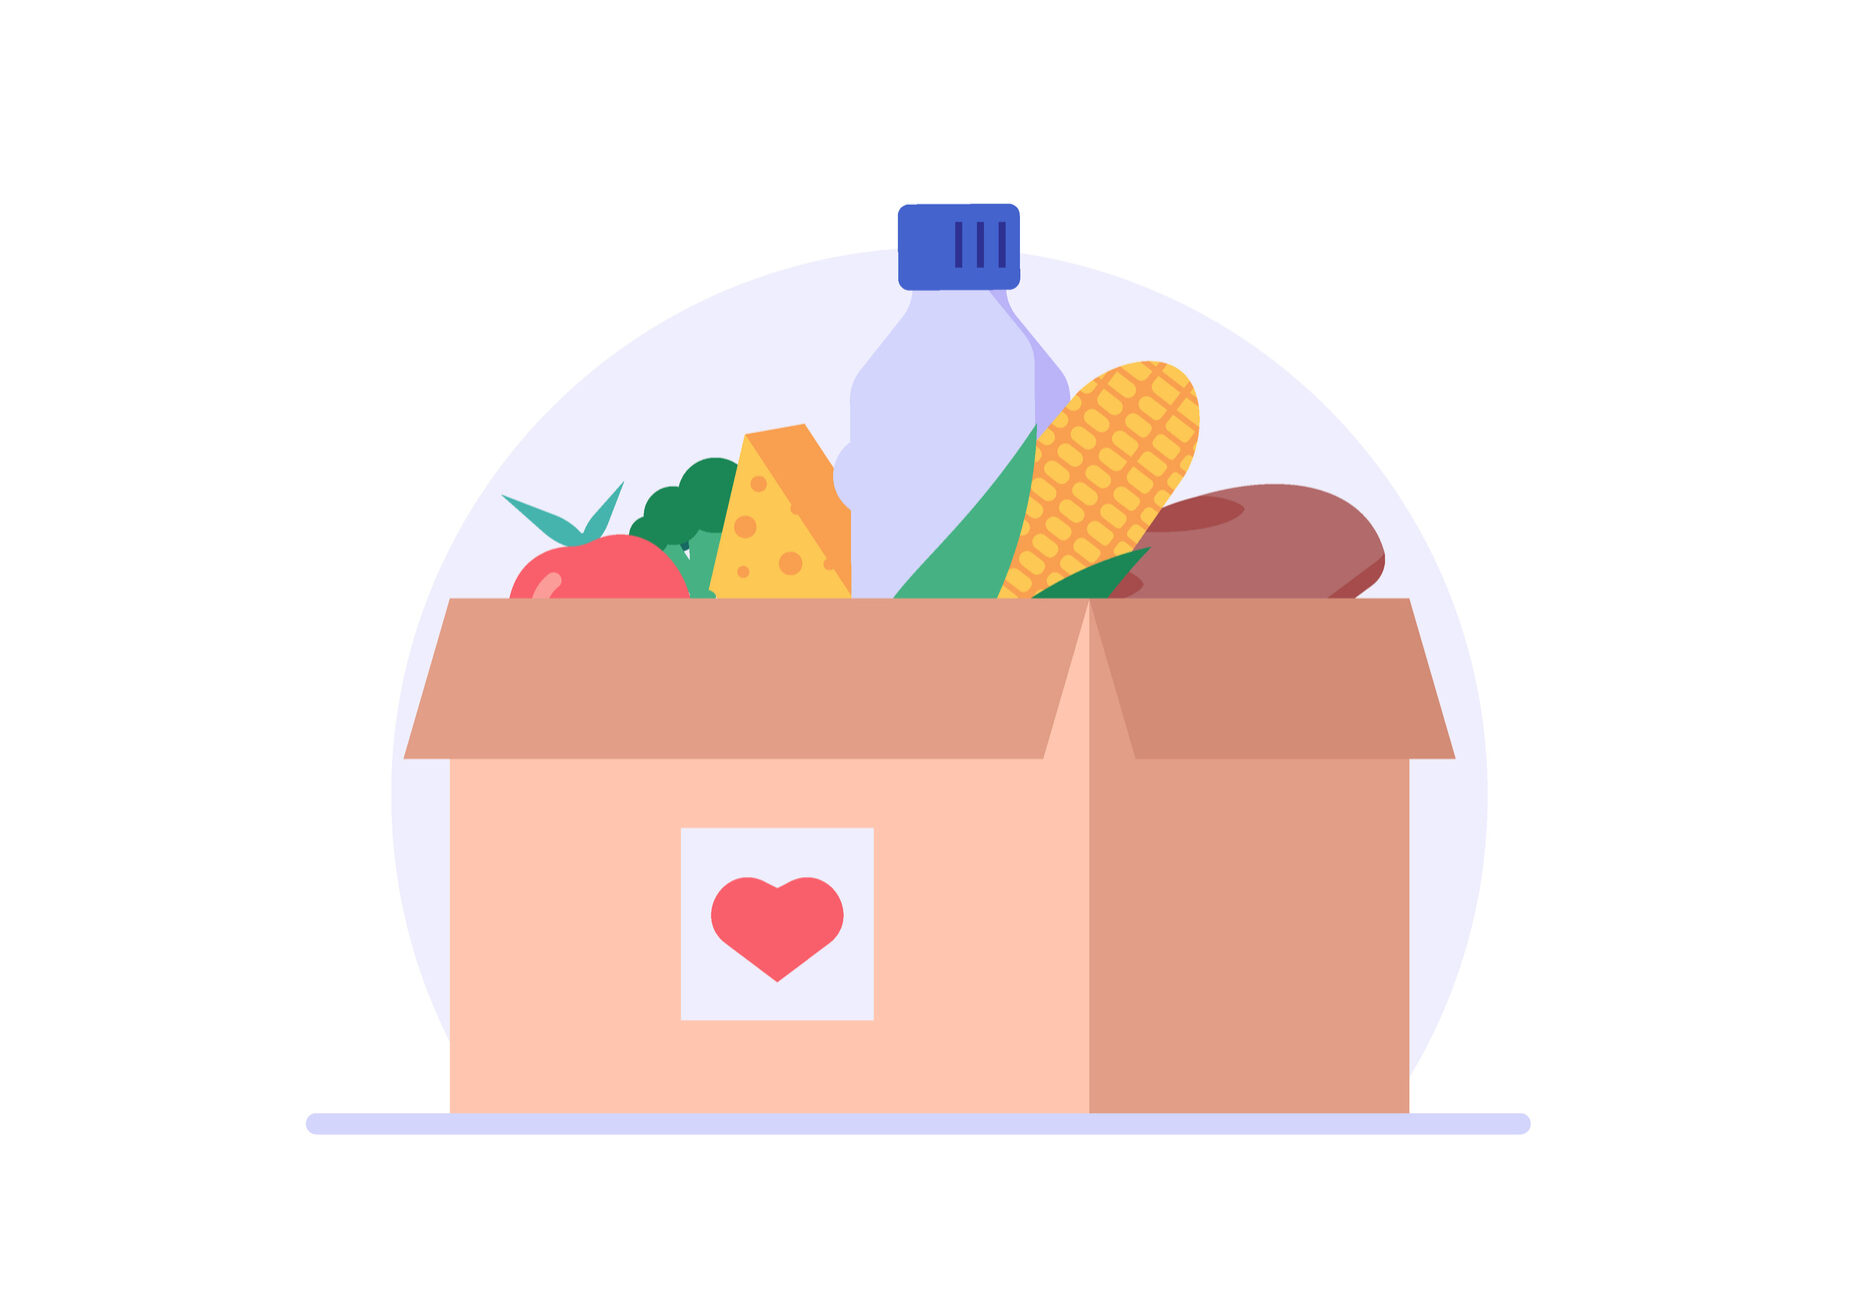 Basket of groceries for charity. Concept of help, social care, volunteering, support for poor people, food donation, charity. Cartoon flat vector illustration for web banner